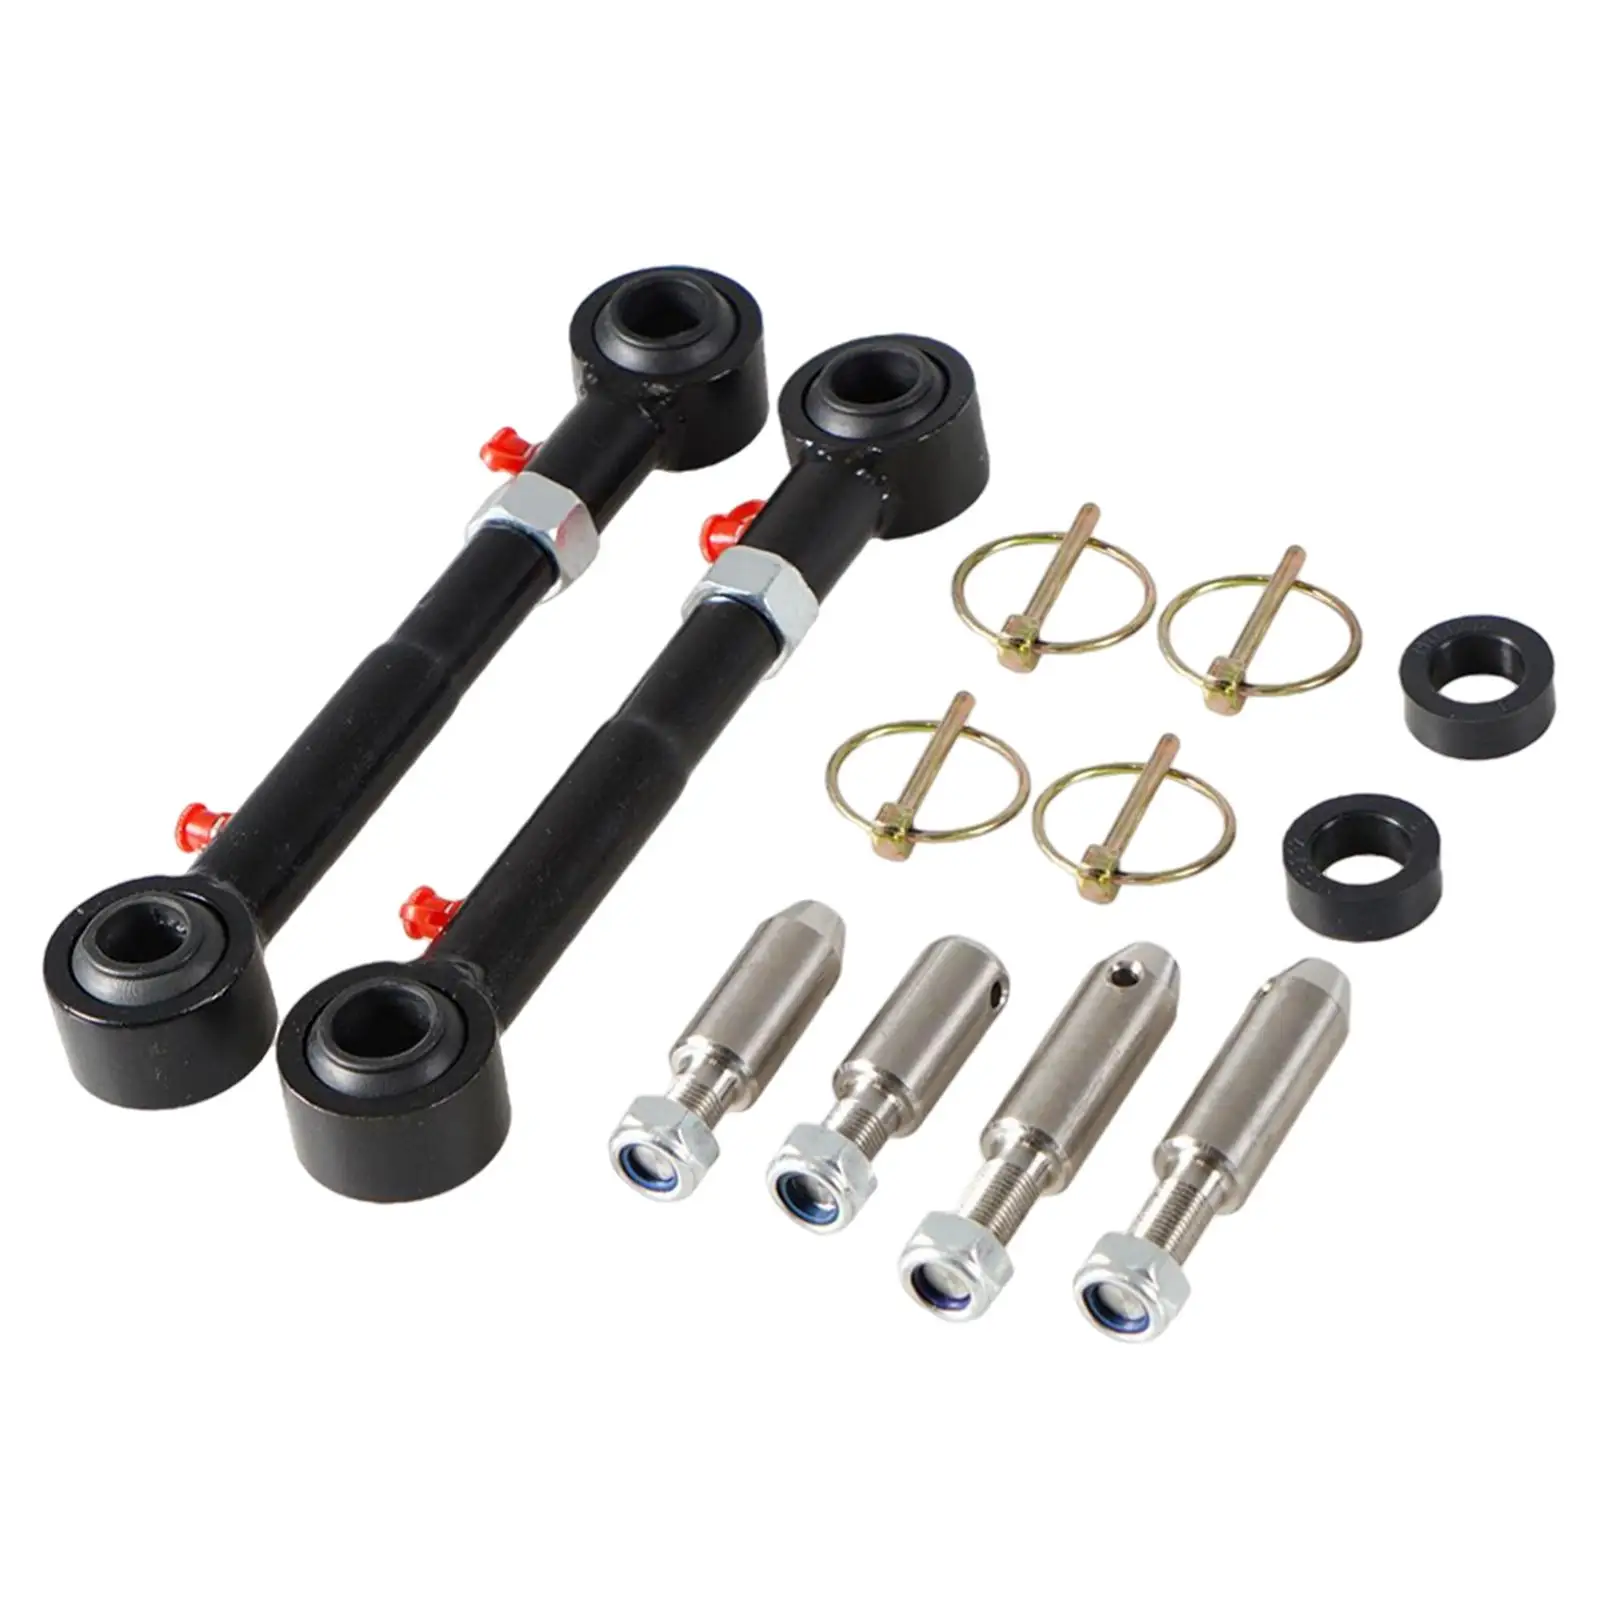 Front Sway Bar Links Disconnects Stainless Steel Fit for Jeep Wrangler JK Jku